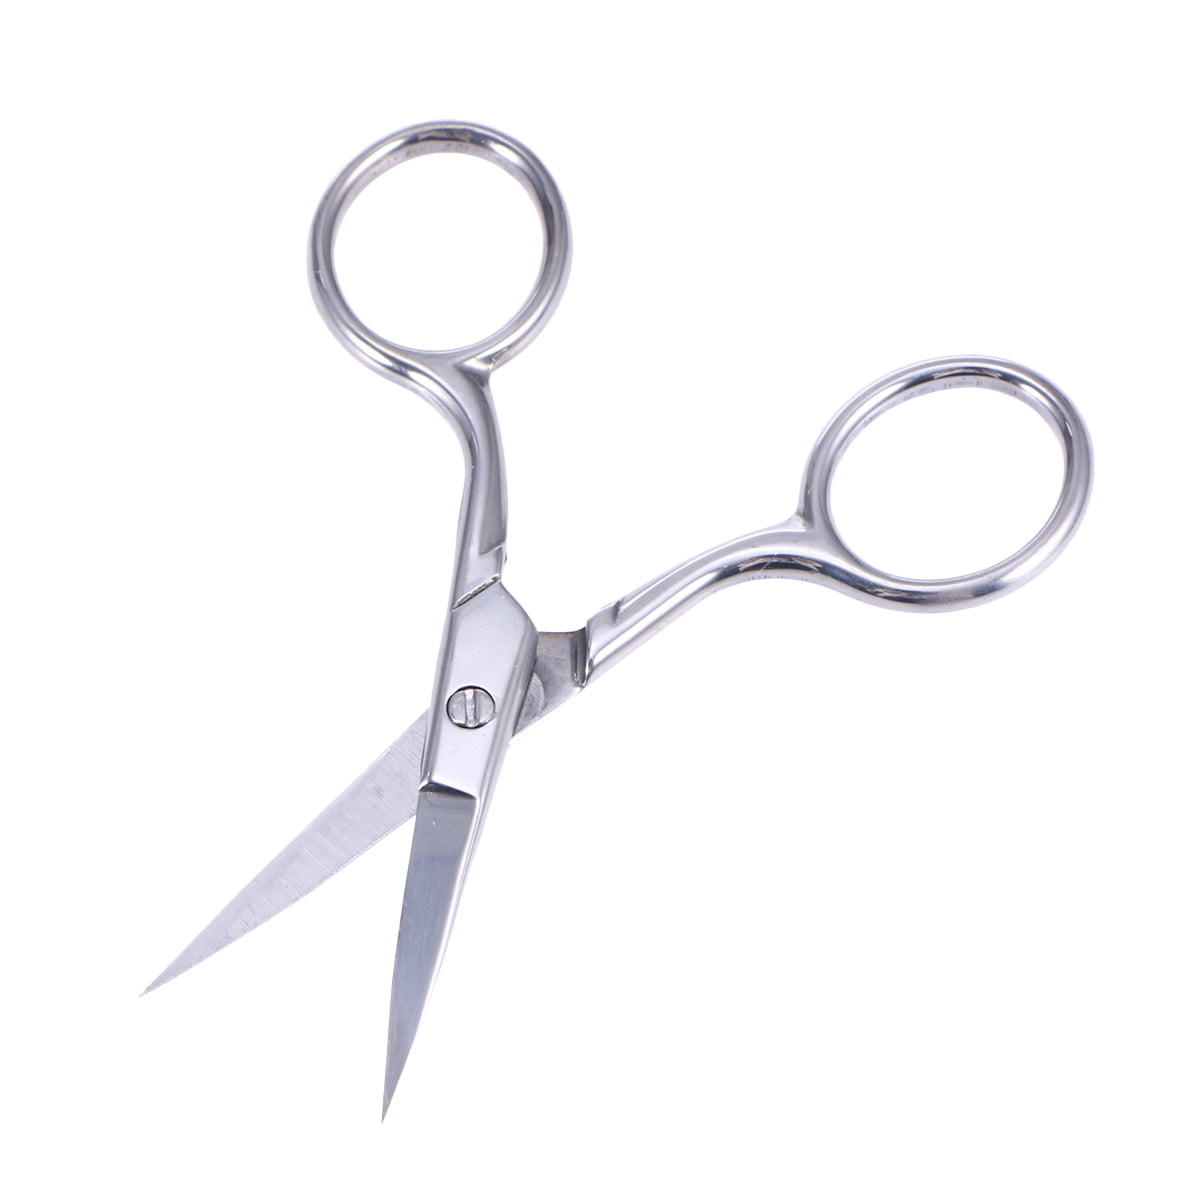 Hair Cutting Shears - Safety Facial Trimming/Clipping Scissors for  Eyebrows,Eyelashes,Nose hair 